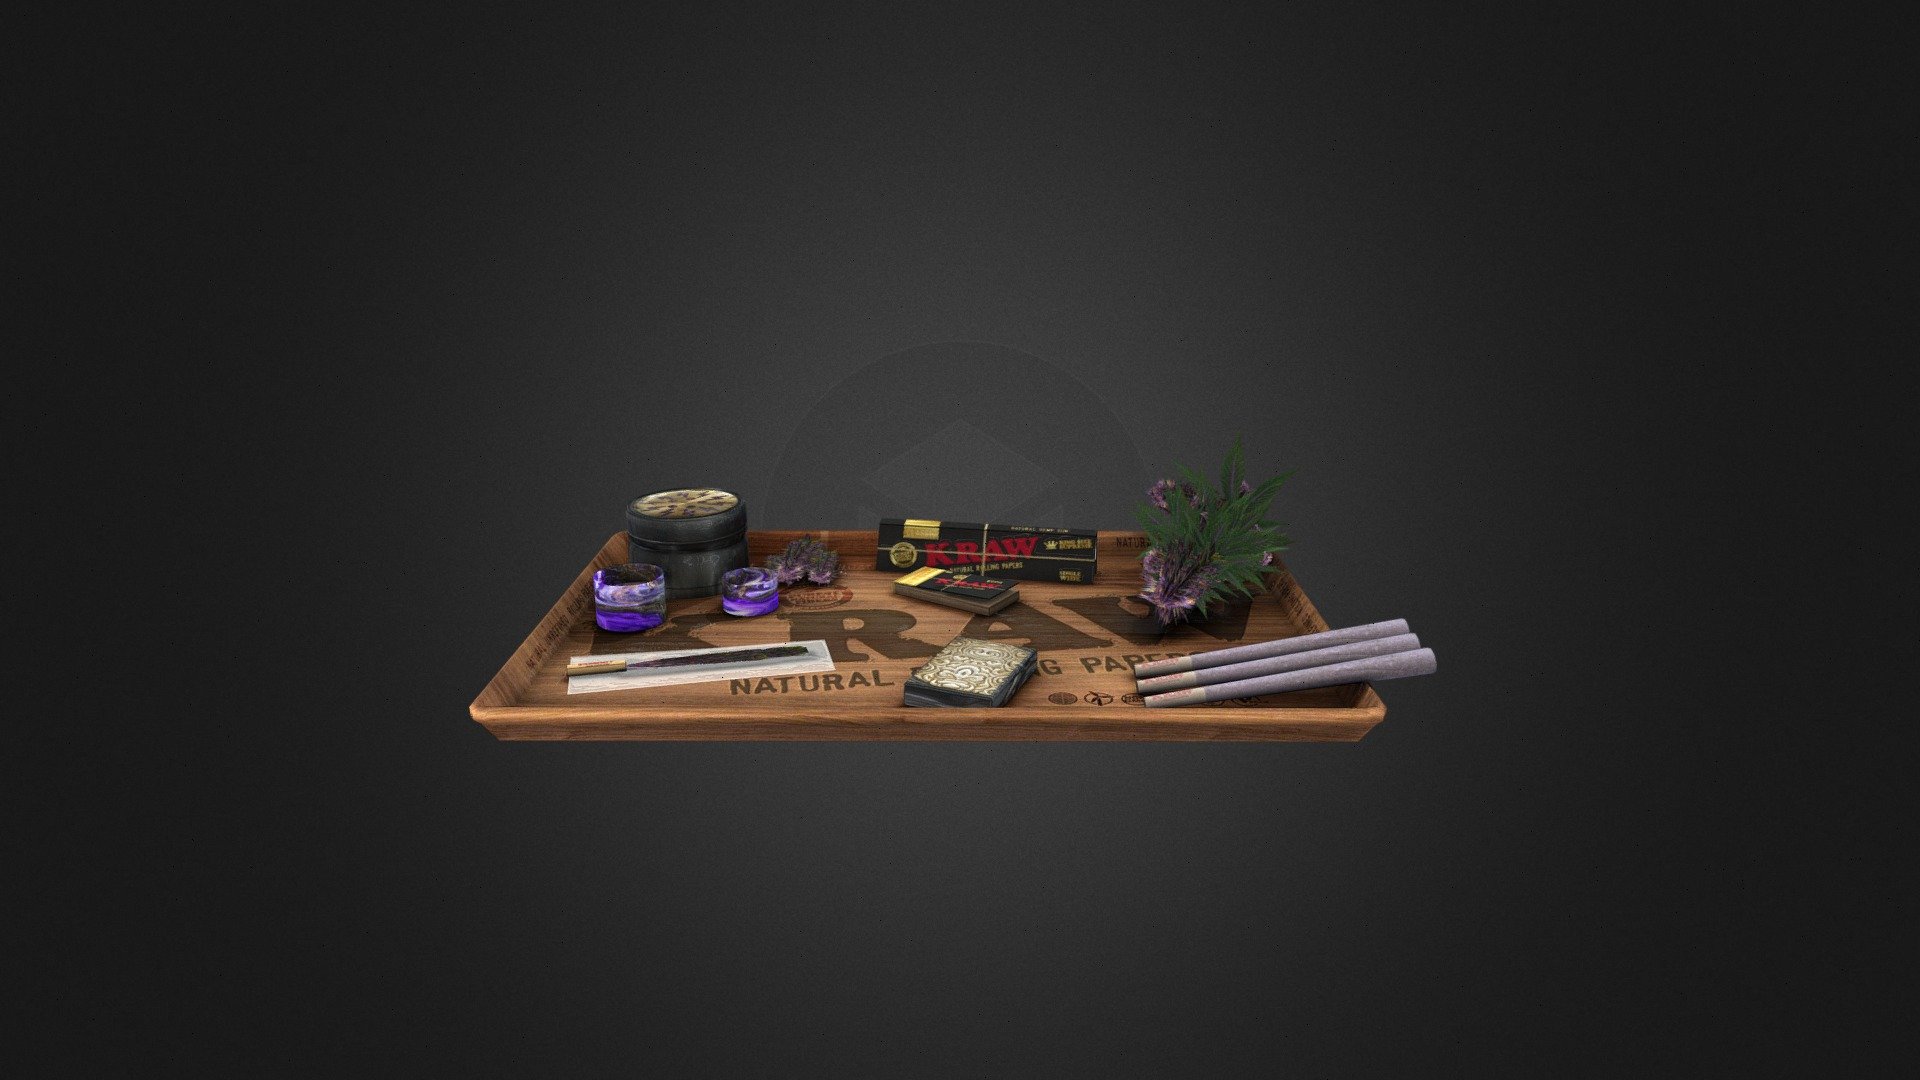 Weed Kit Purple Haze

The best way to roll is using a Kraw rolling kit, containg the top products of cannabis ! ( Low Poly and realistic textures )

Including items:

Kraw wood rolling tray

Kraw tips box

Kraw rolling paper box

Thunder Grinder

Classic Ligther

The most pure Kief in Resin pot

Strongest Hash ball in Resin pot

Joint not rolled yet

3 Cones joints rolled

And a lots of Purple Haze Weed for the Happynes of all ! - weed kit purple haze - 3D model by LKSHash 3d model